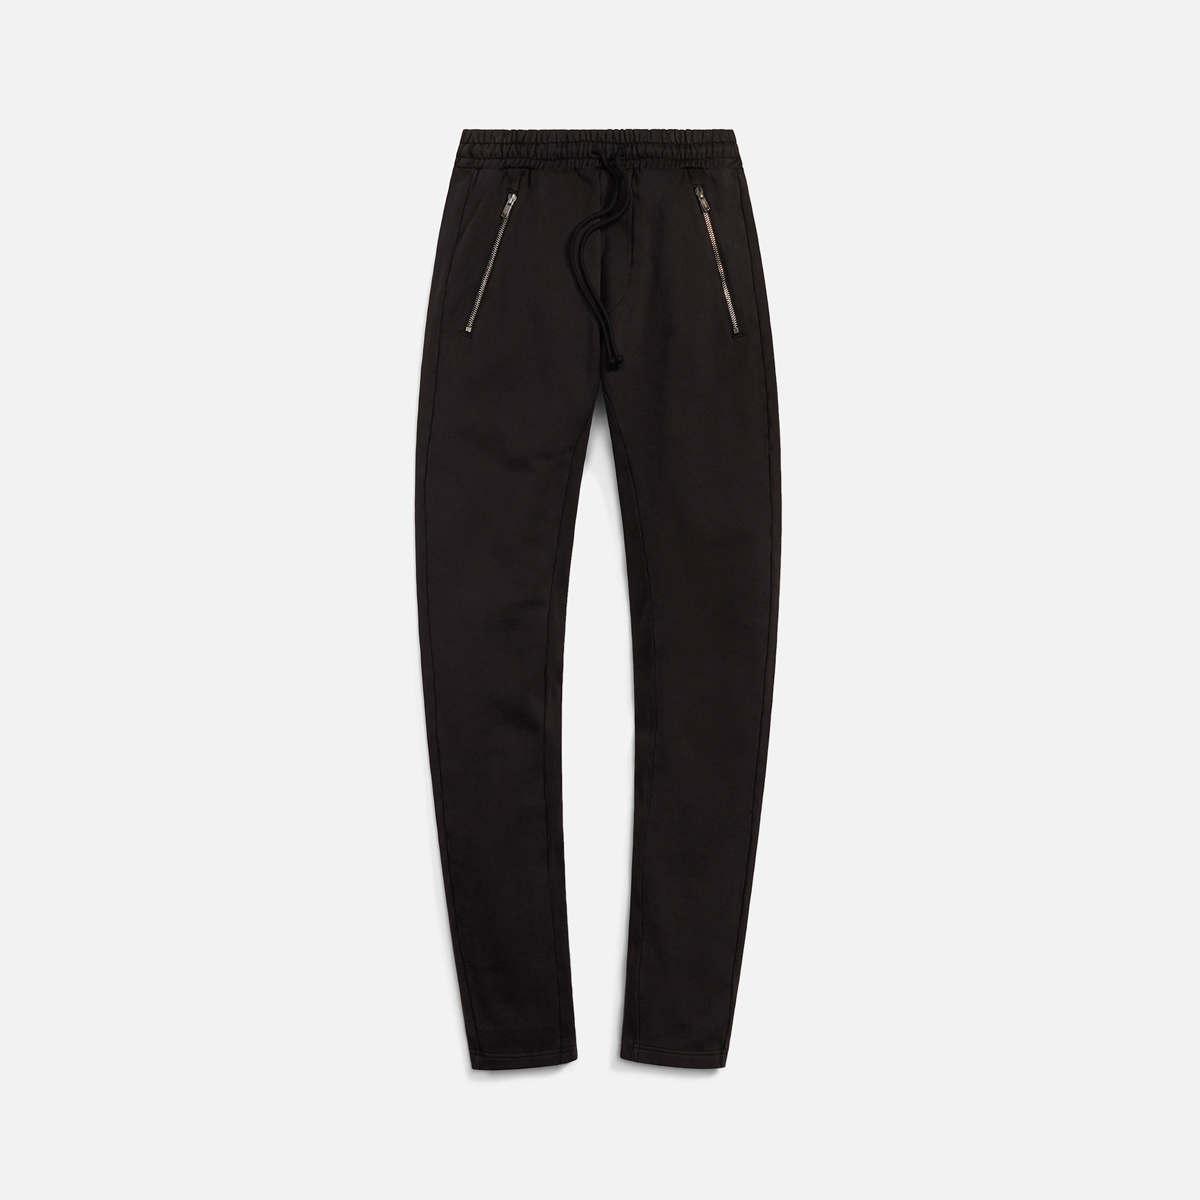 kith-fall-winter-2021-collection-bottoms-20